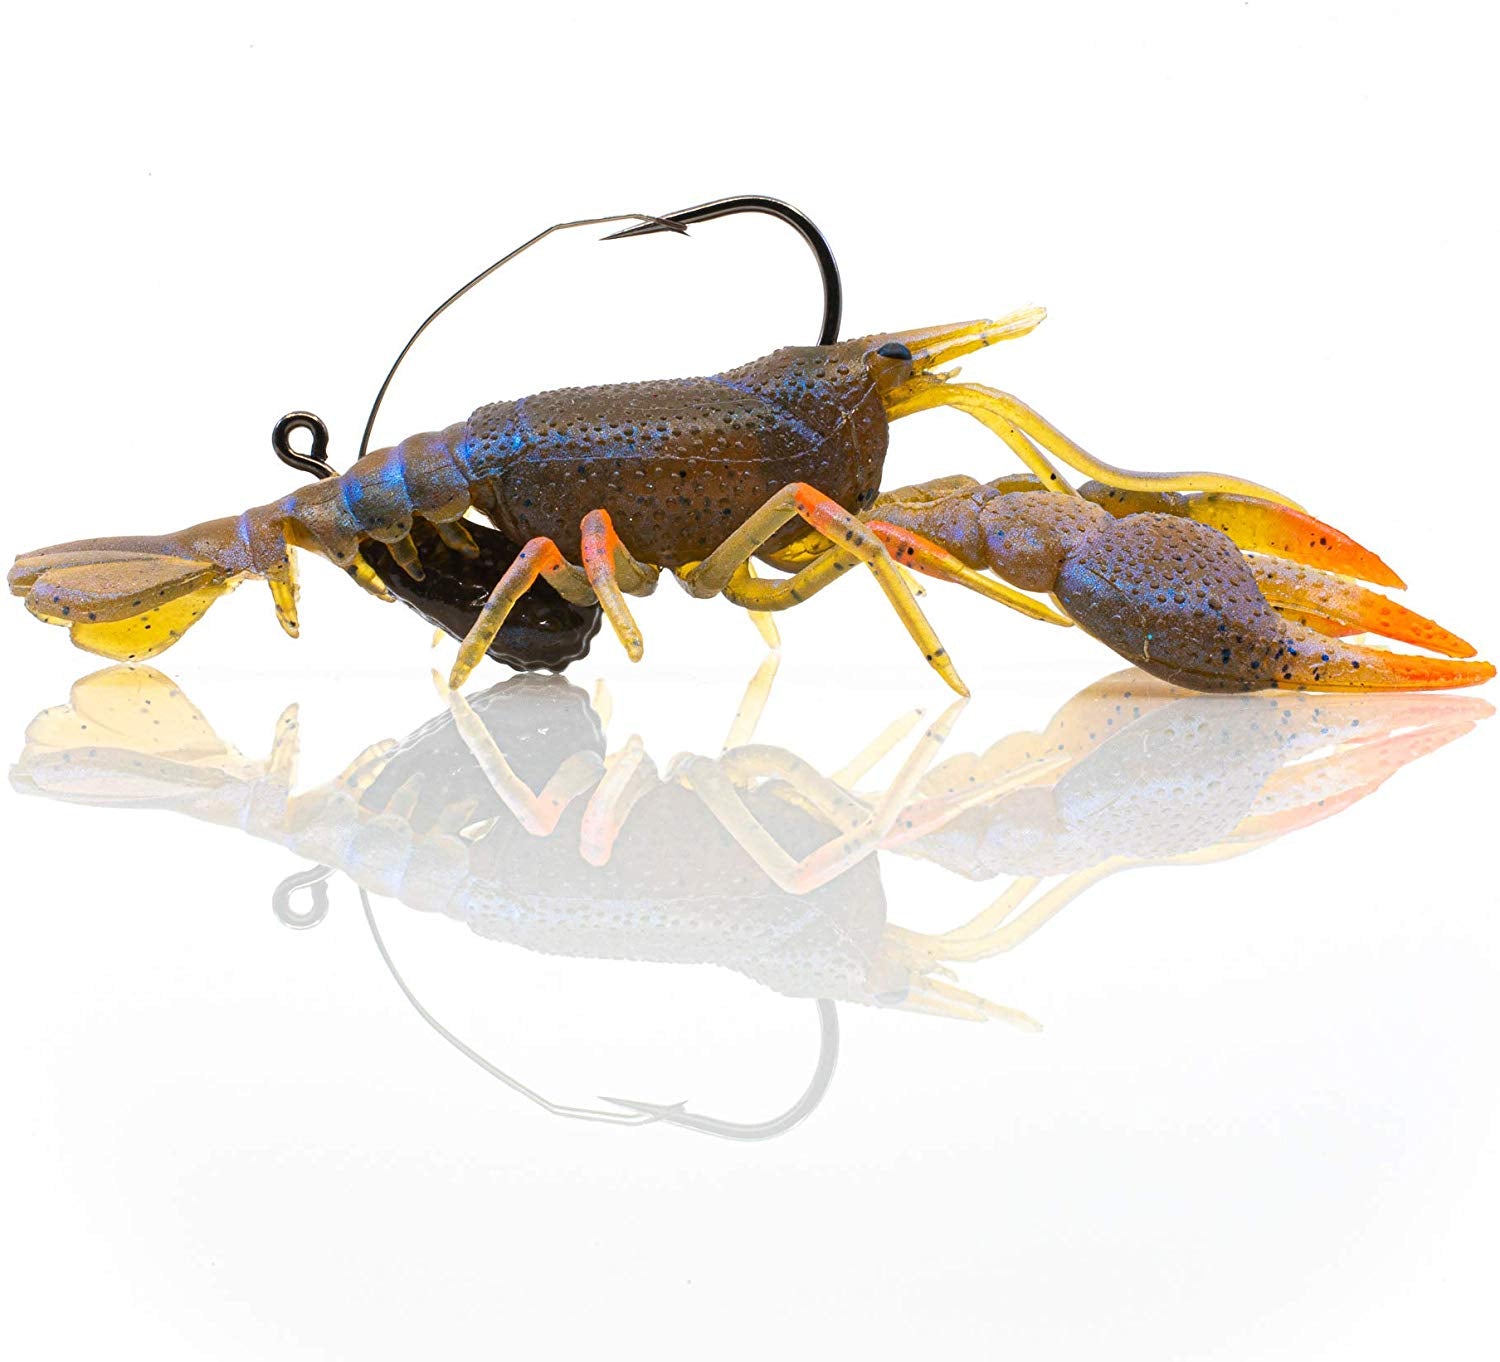 A Closer Look at the Chasebaits Mudbug - Realistic Bass Fishing Crawfish  Creature Lure Bait 